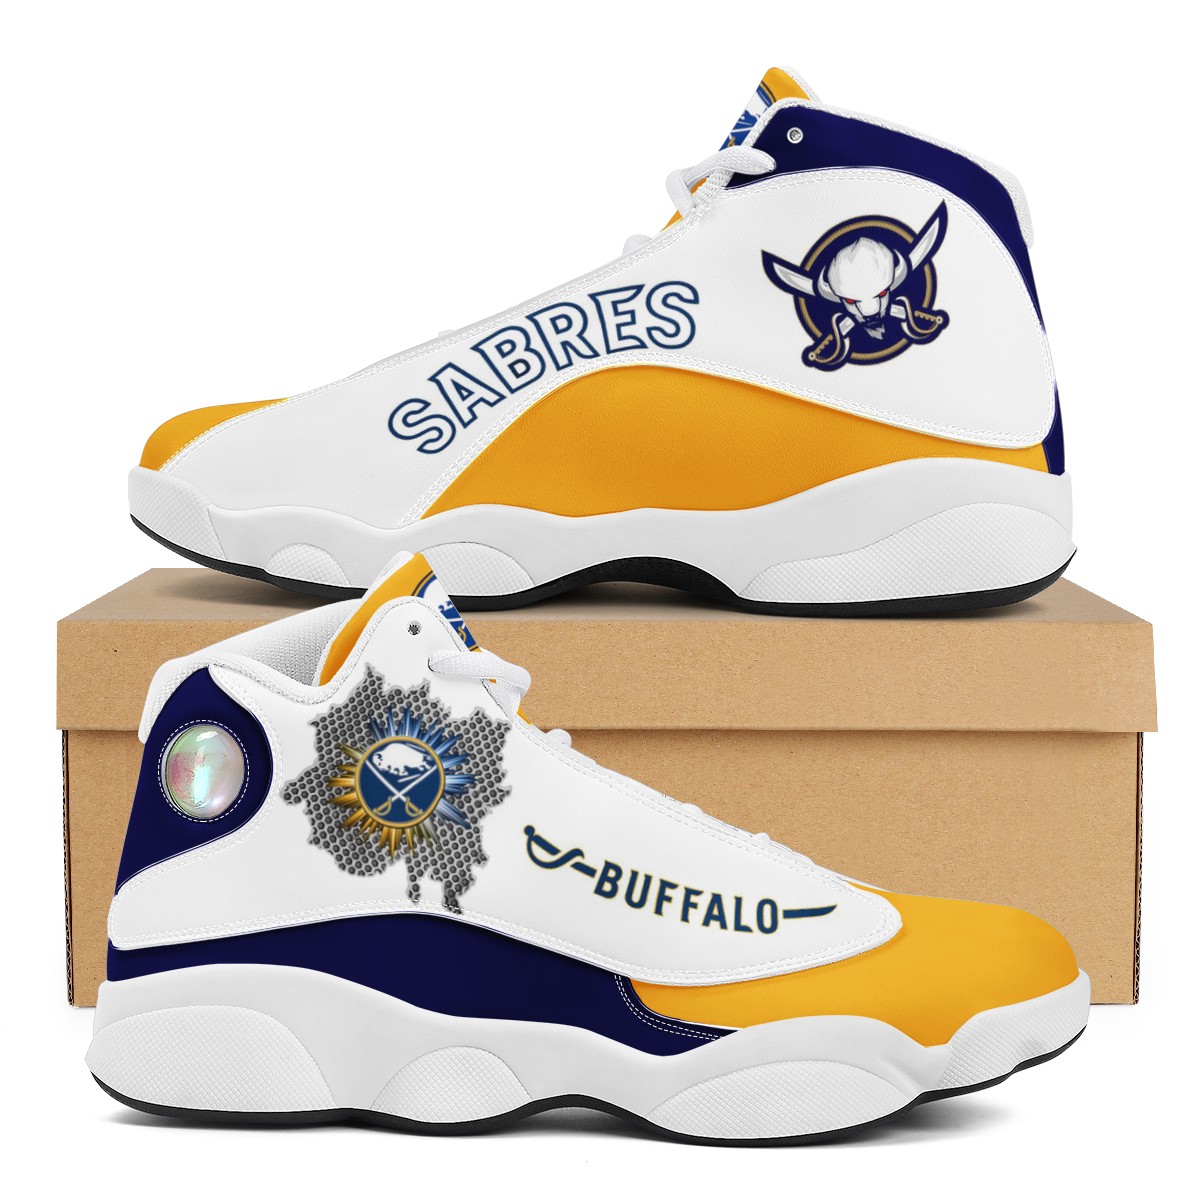 Women's Buffalo Sabres Wings Limited Edition JD13 Sneakers 001